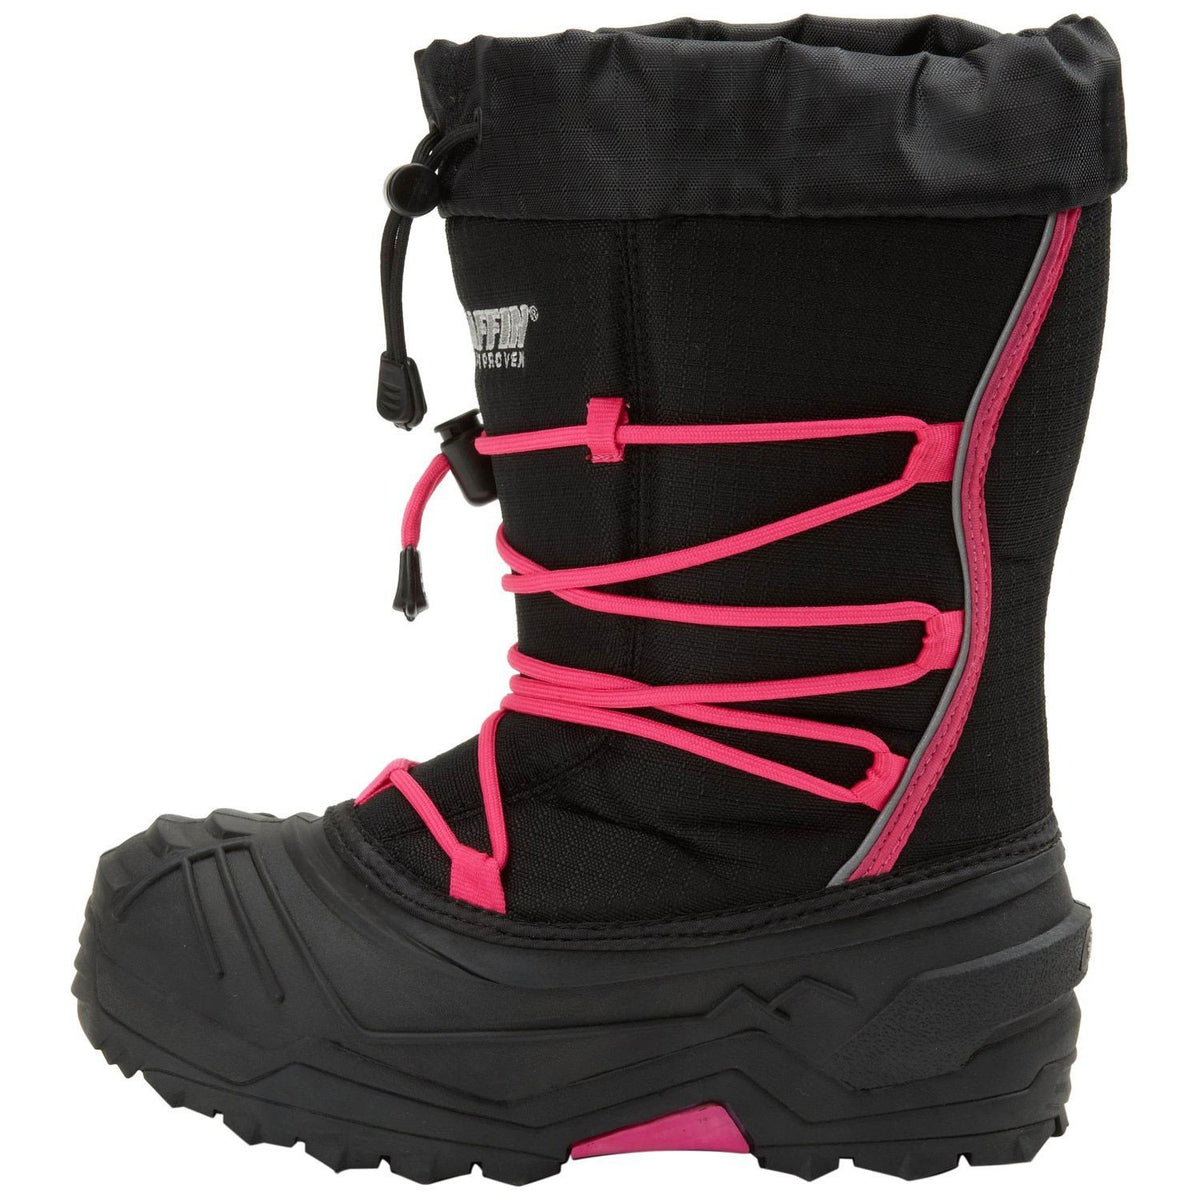 Baffin Youth Snogoose Boots